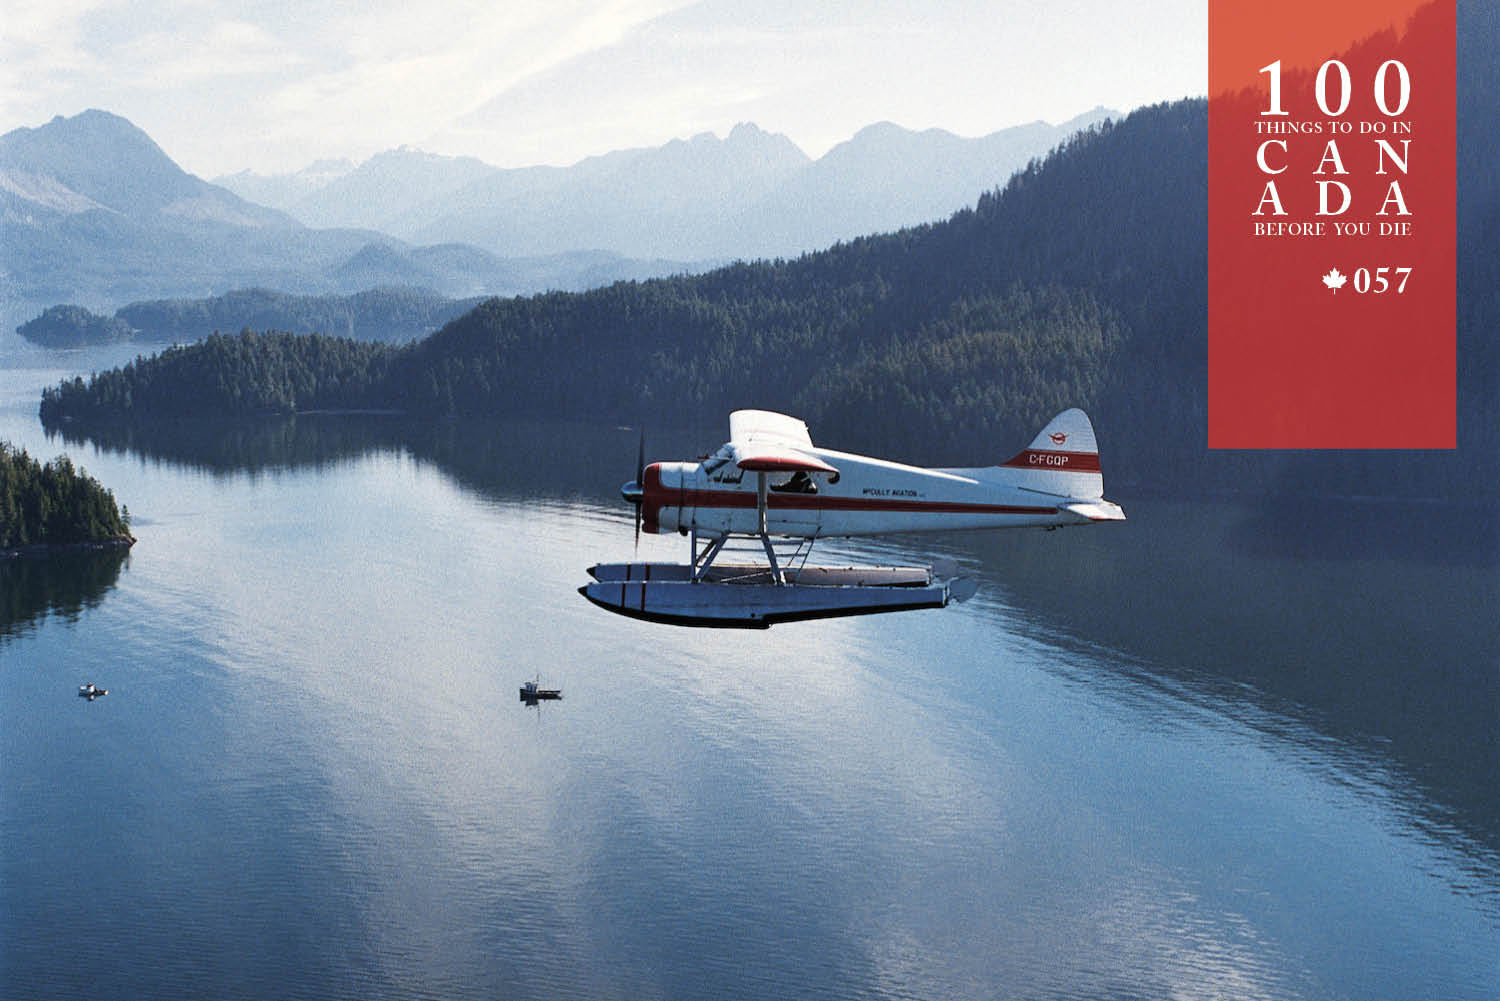 Fly in ultimate style to Canada's famous Whistler